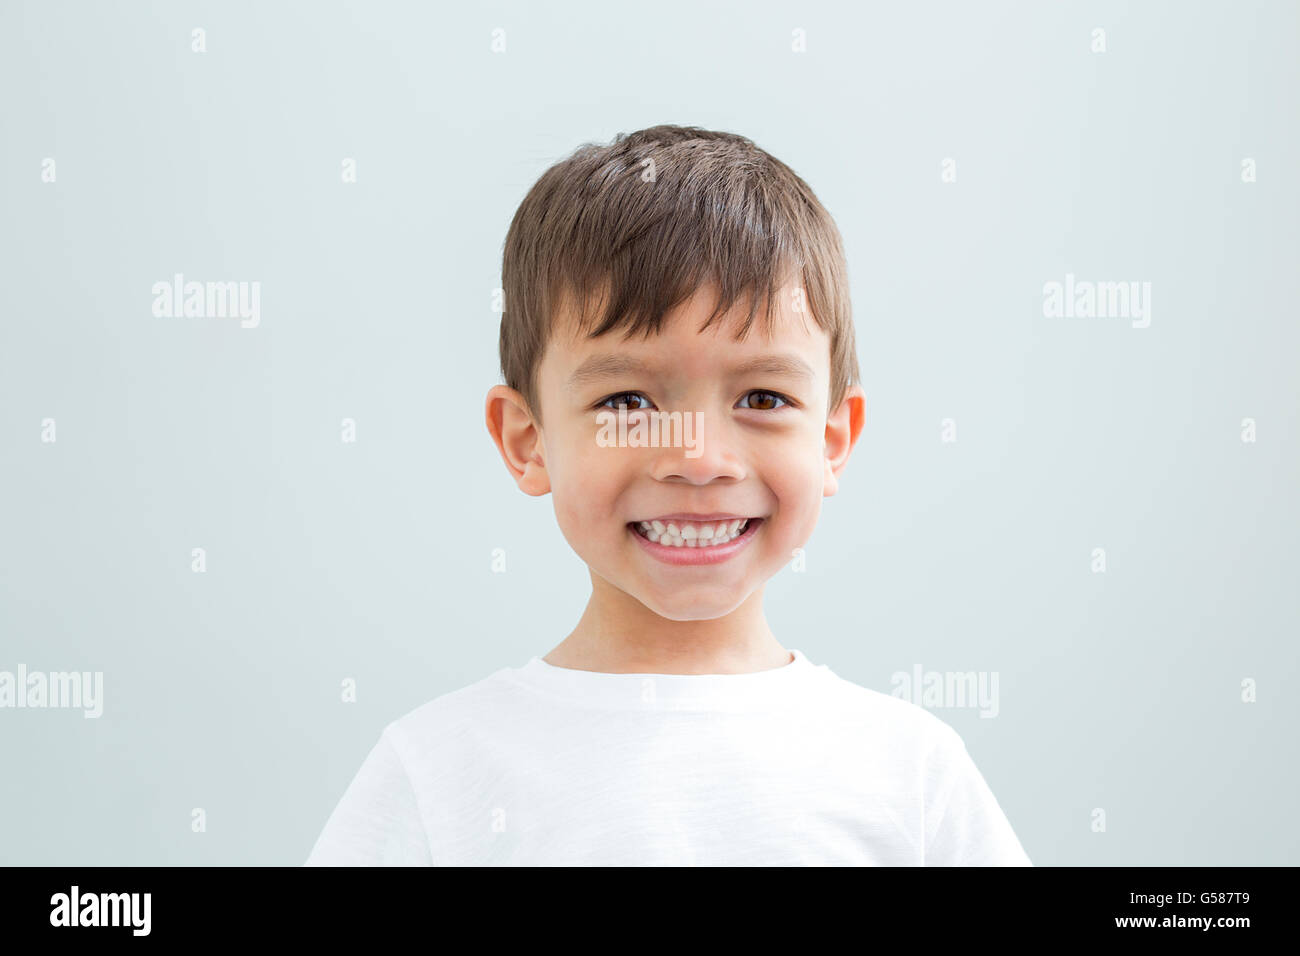 Landscape head shot of a young boy on a plain background. He is smiling at the camera. Stock Photo